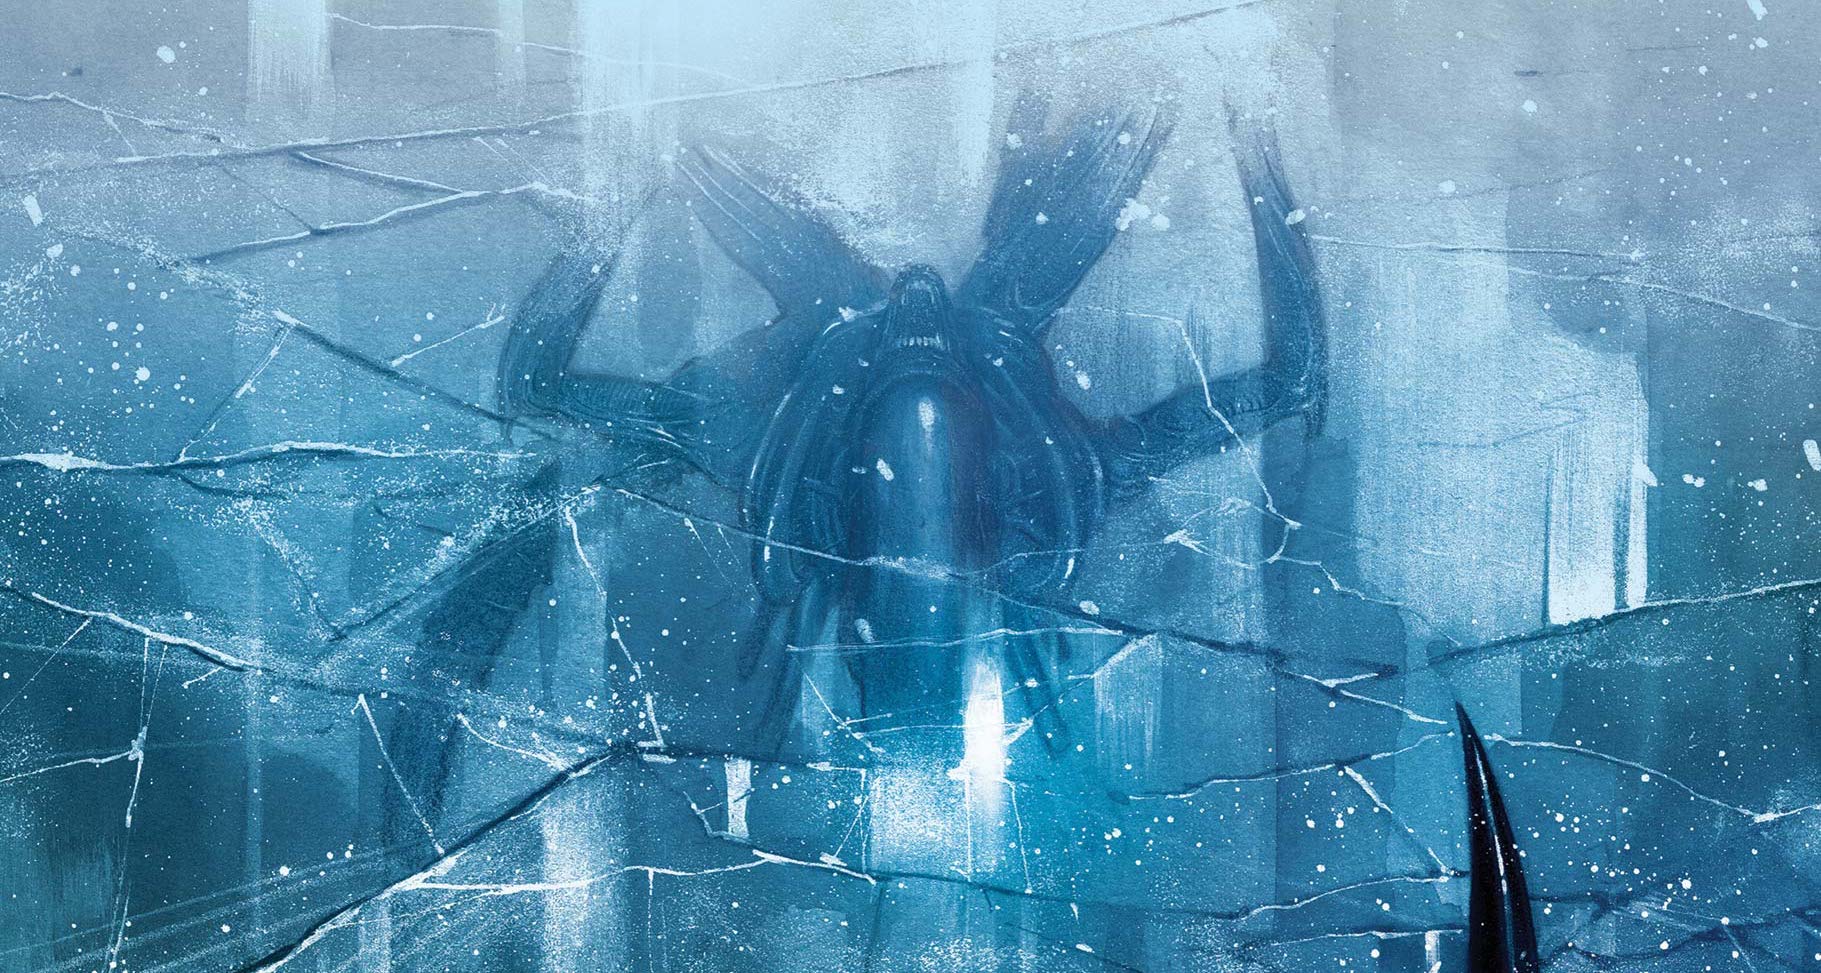 'Alien' #1 sets up an ice world filled with Xenomorphs